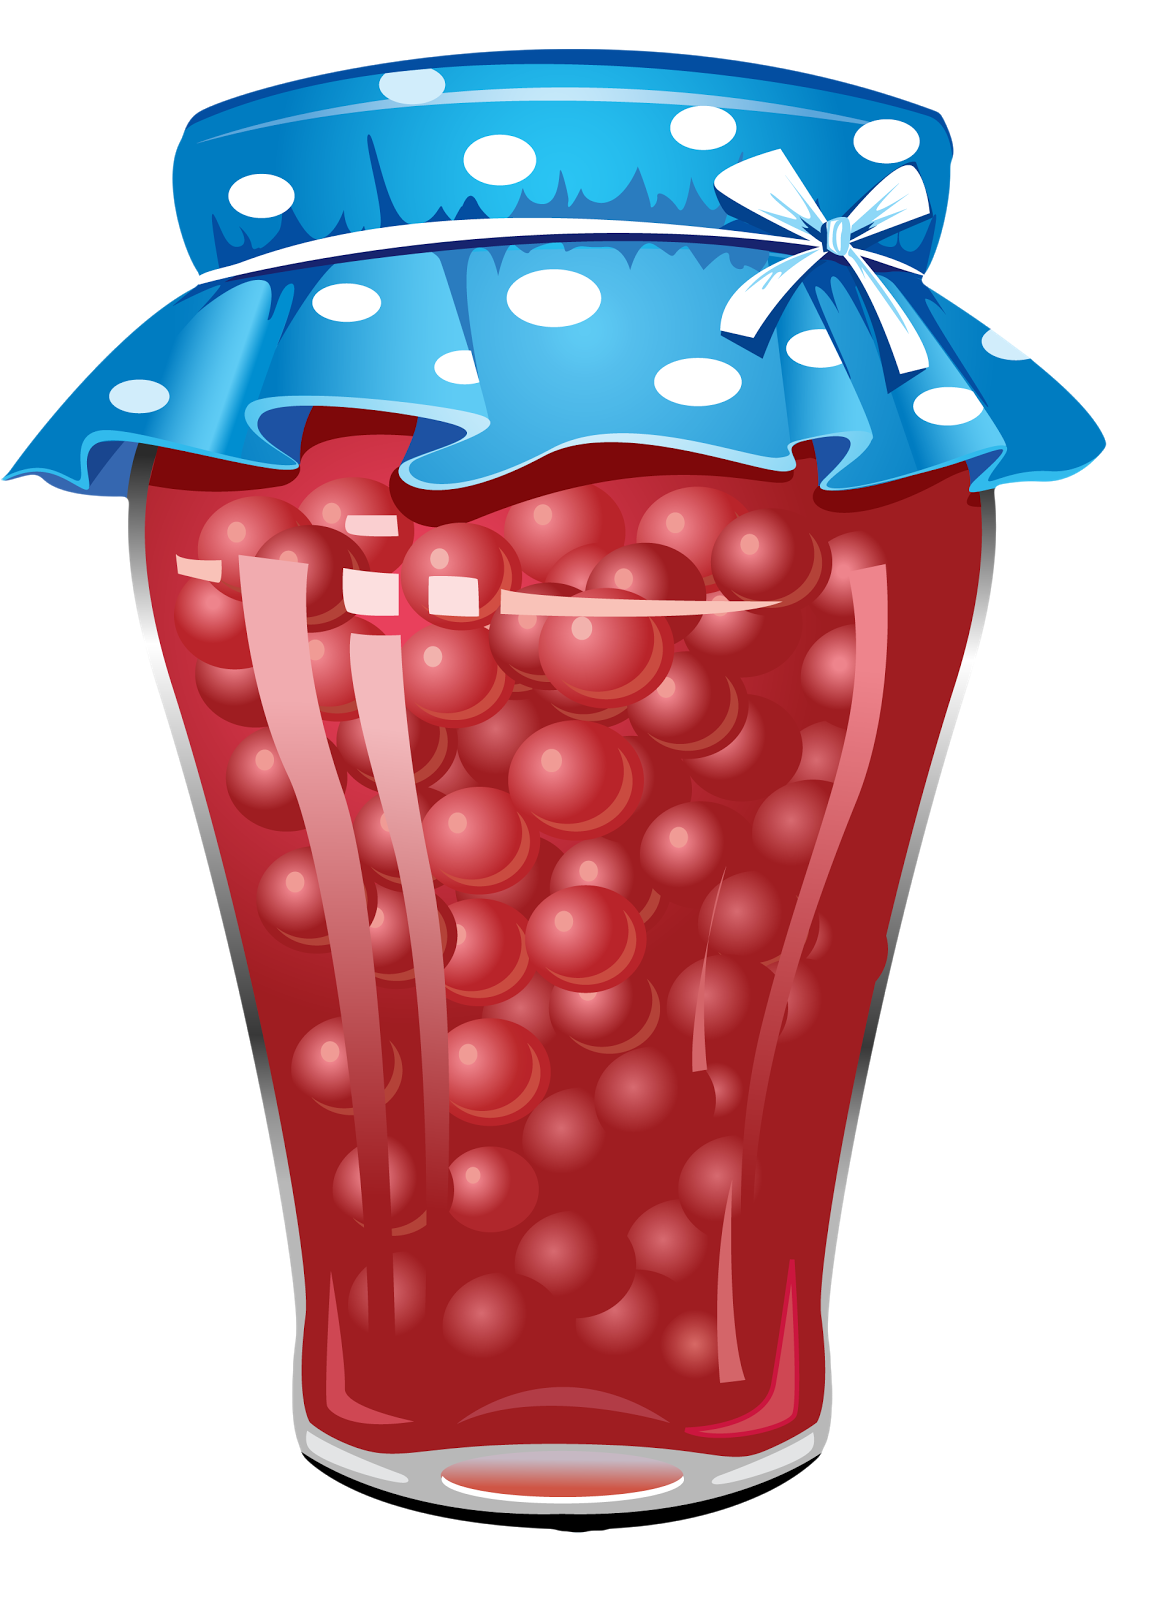 A Jar Of Red Liquid With A Blue And White Polka Dot Top